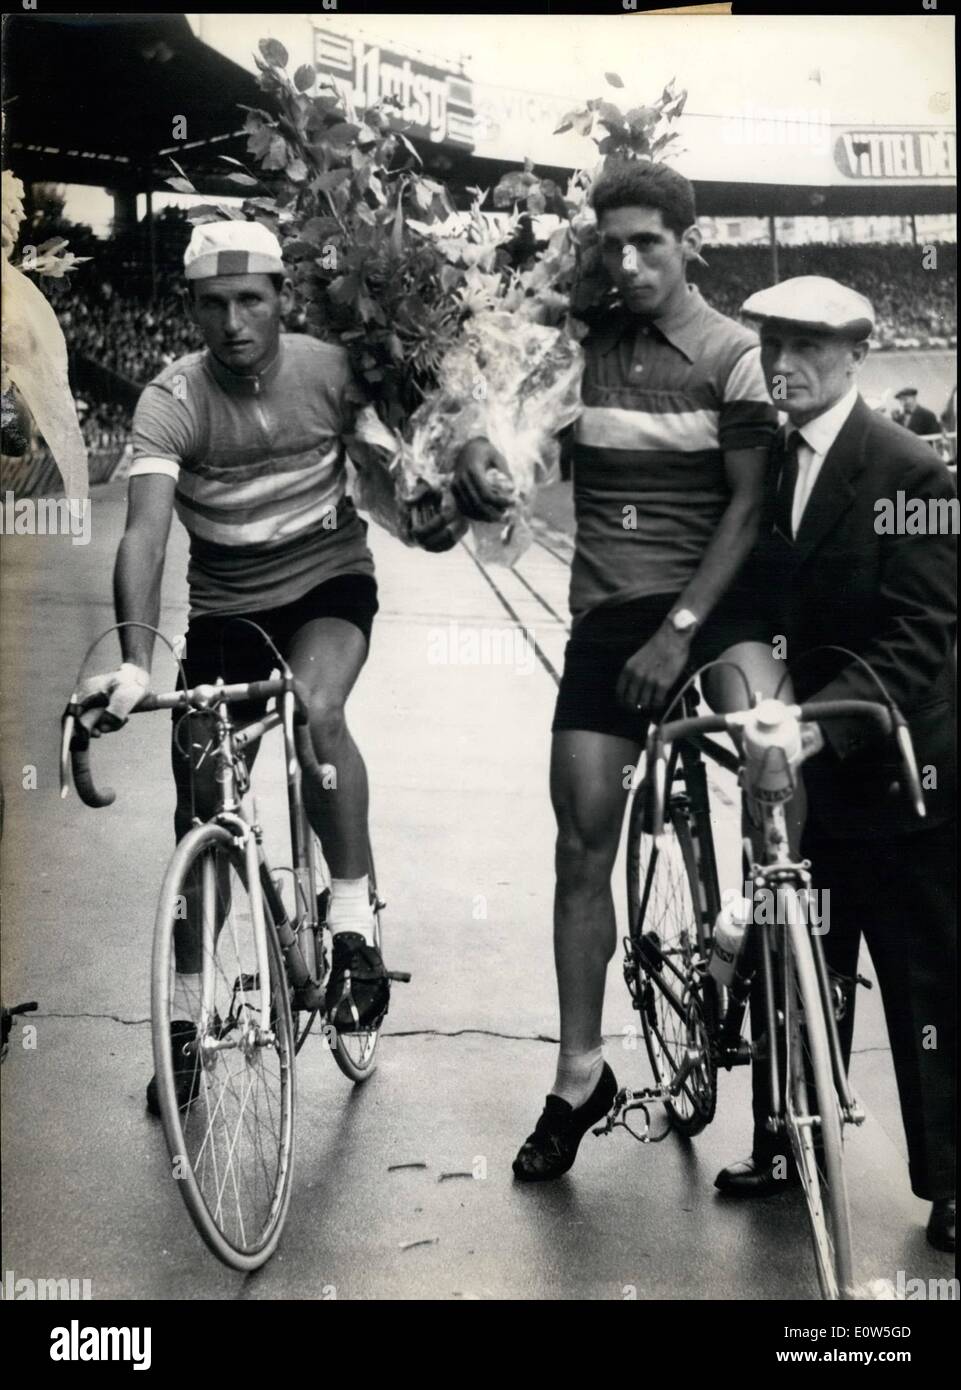 Jul. 07, 1961 - The Tour De France Bicycle Race Won By Anquetil: Jacques Anquetil (France) was crowned King of the 48th Tour De Stock Photo